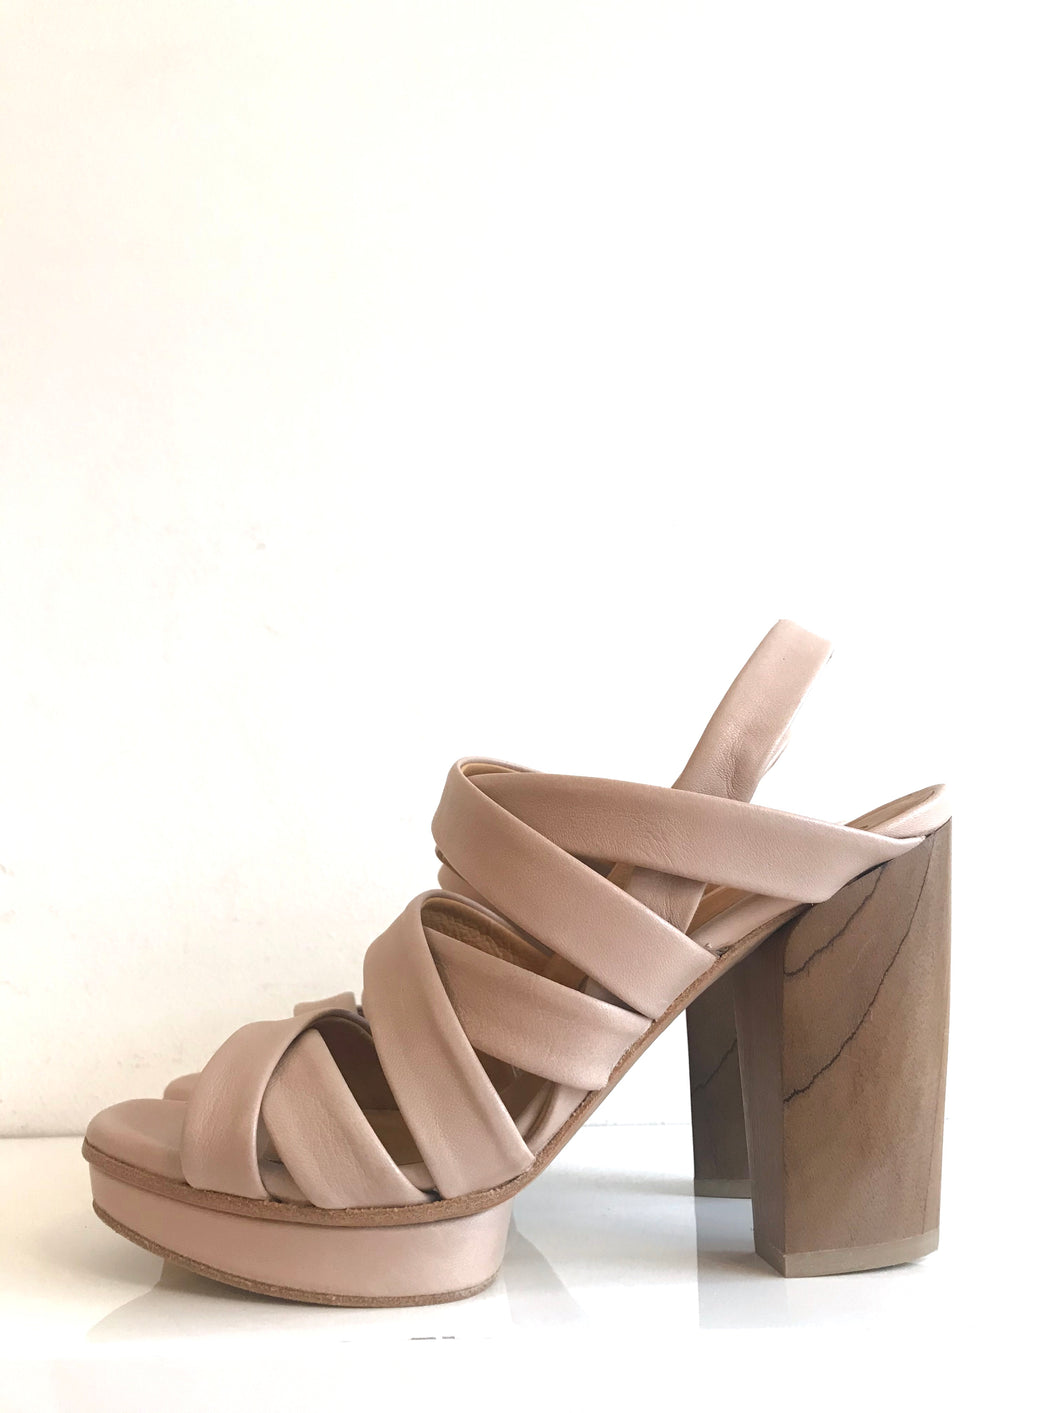 UFO - Open-Toed Strappy Sandal in a Soft Beige Leather